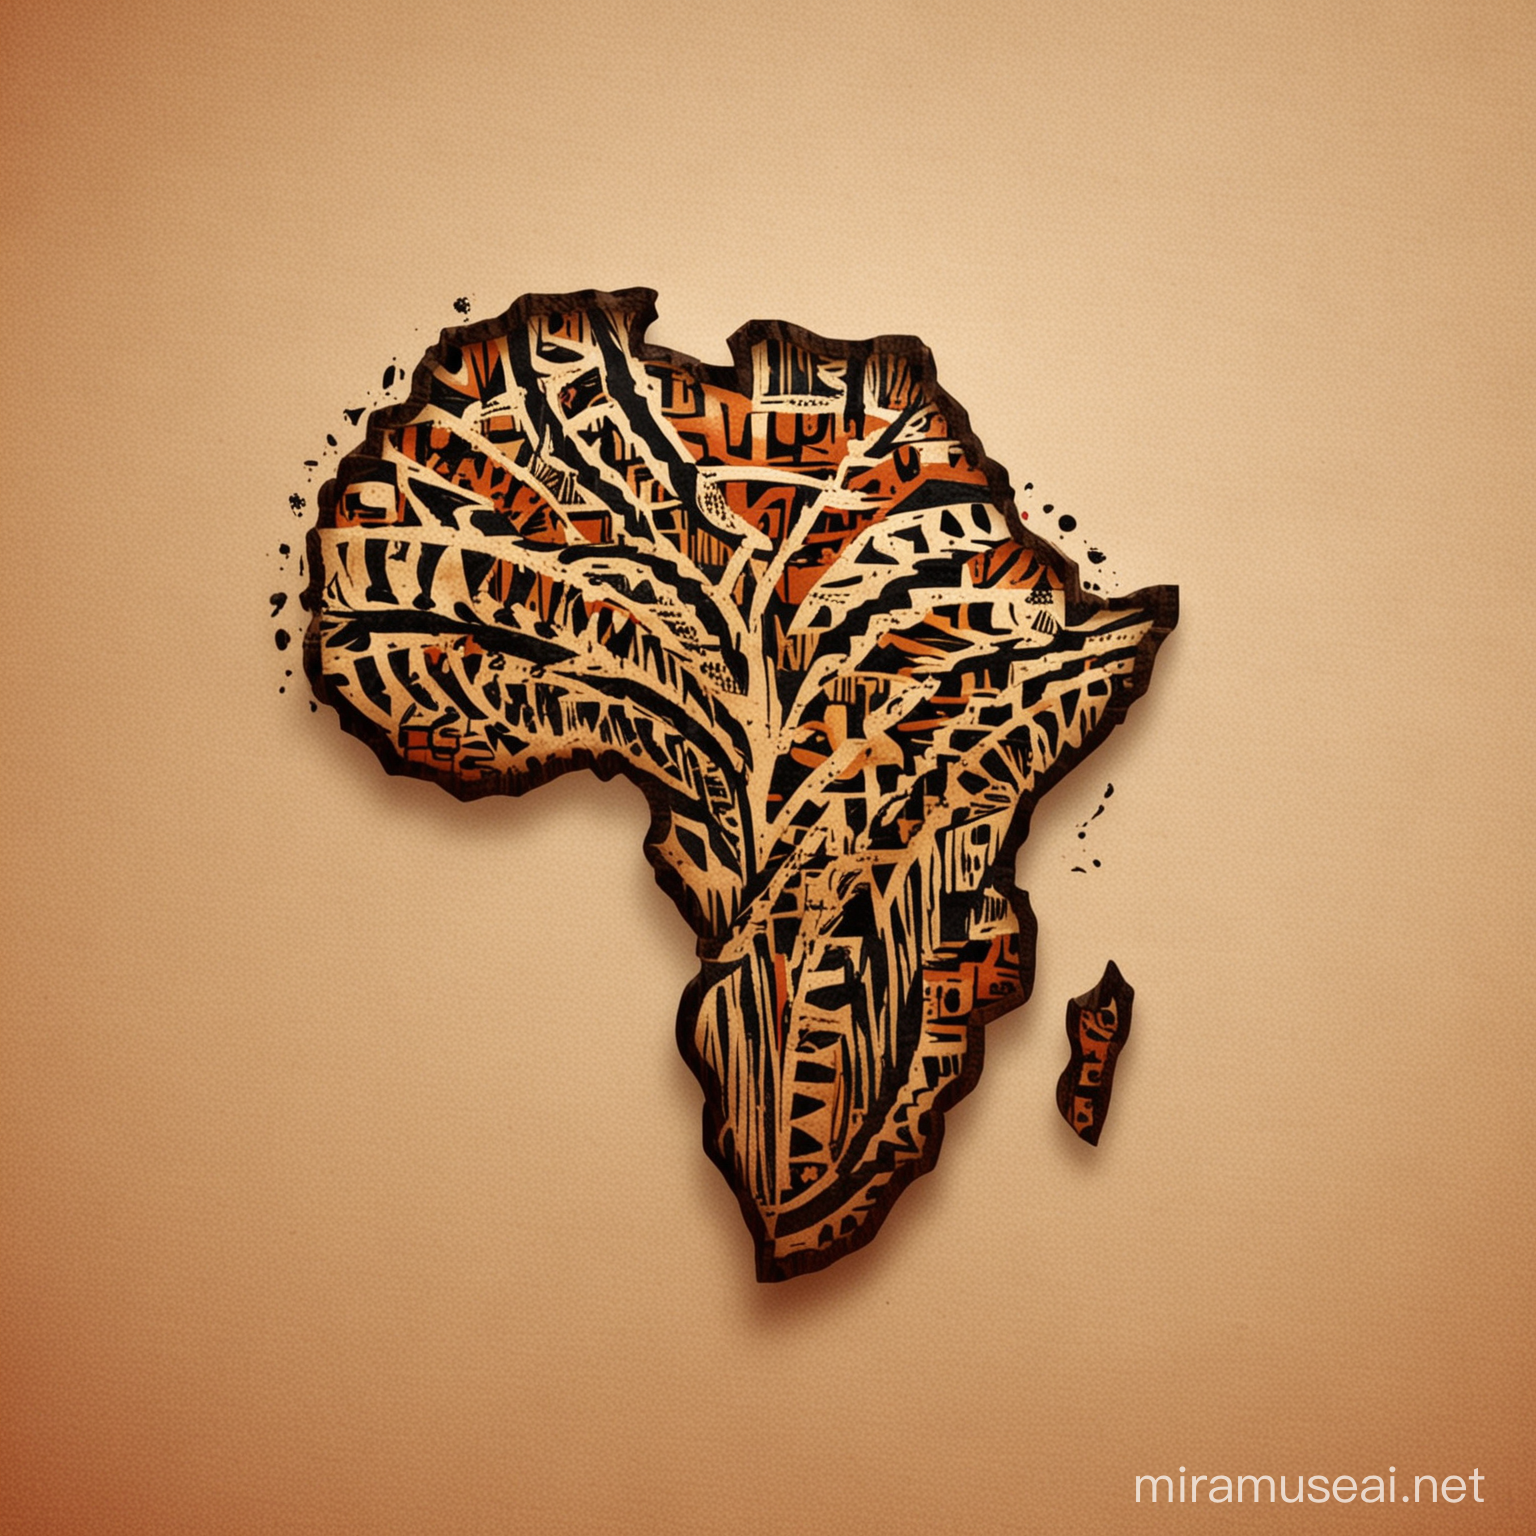 A logo design for my company which is related to Africa and voice